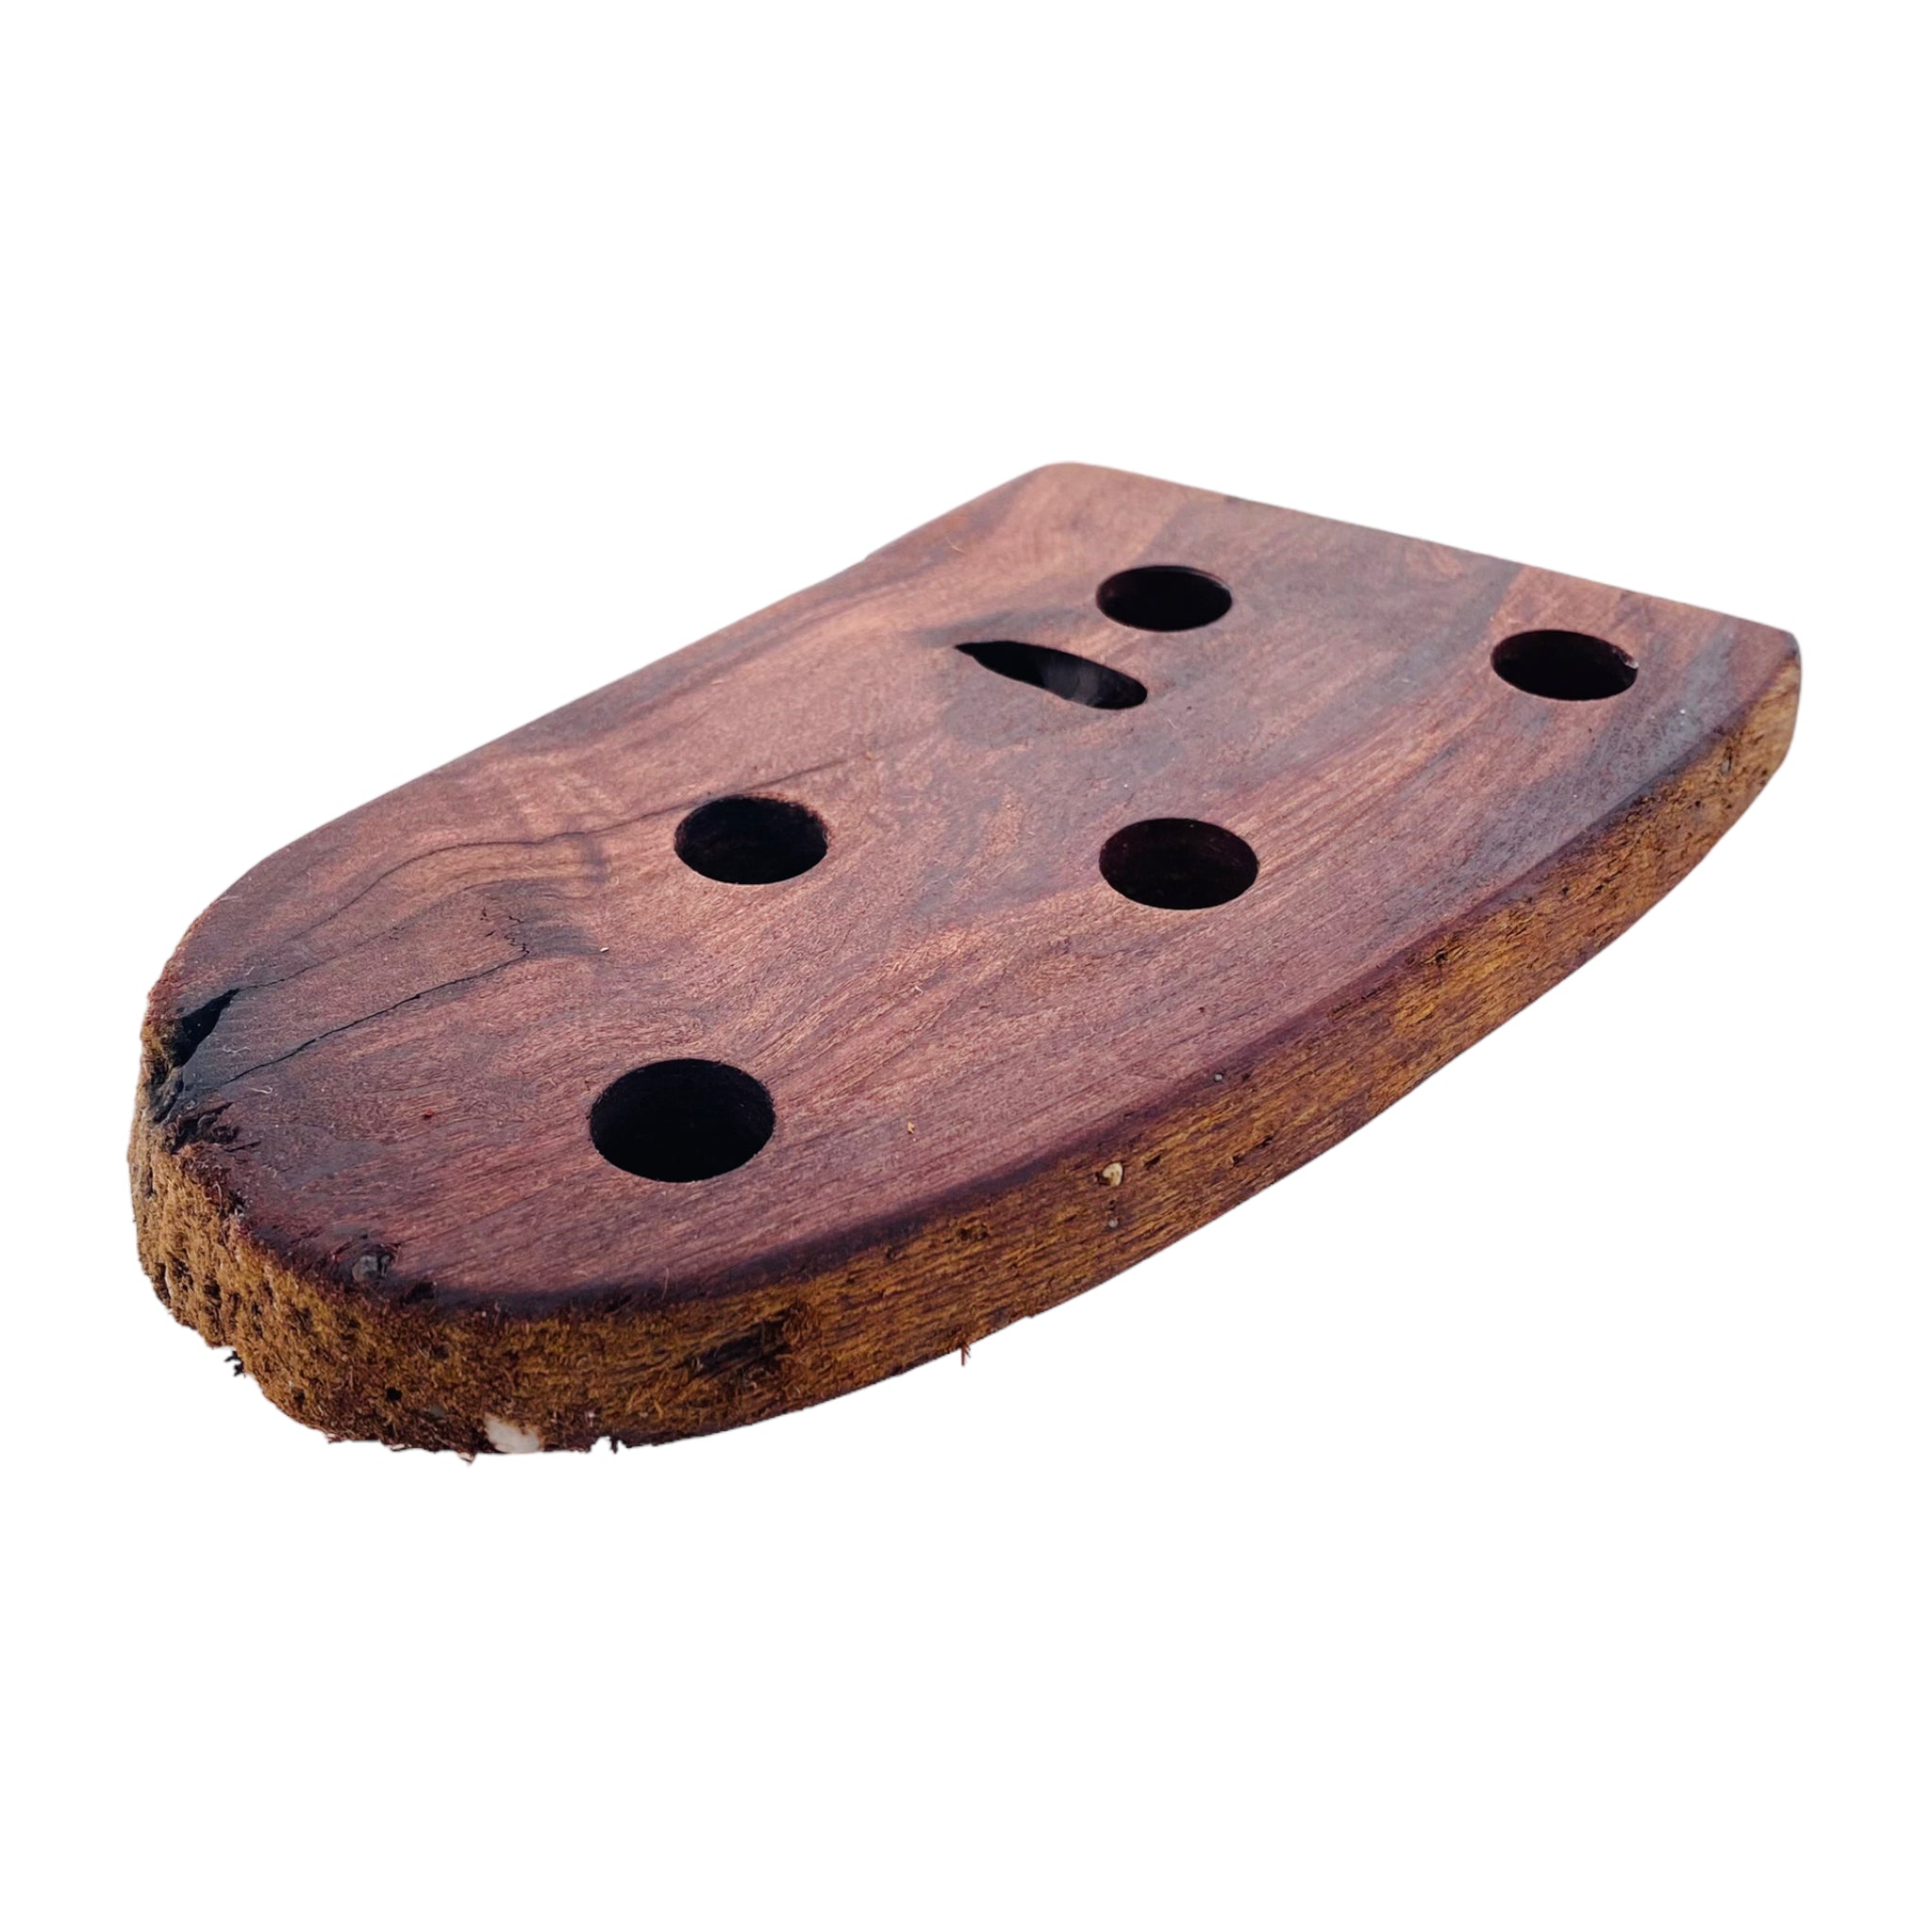 5 Hole Wood Display Stand Holder For 14mm Bong Bowl Pieces Or Quartz Bangers - Red Wood Burl With Live Edge